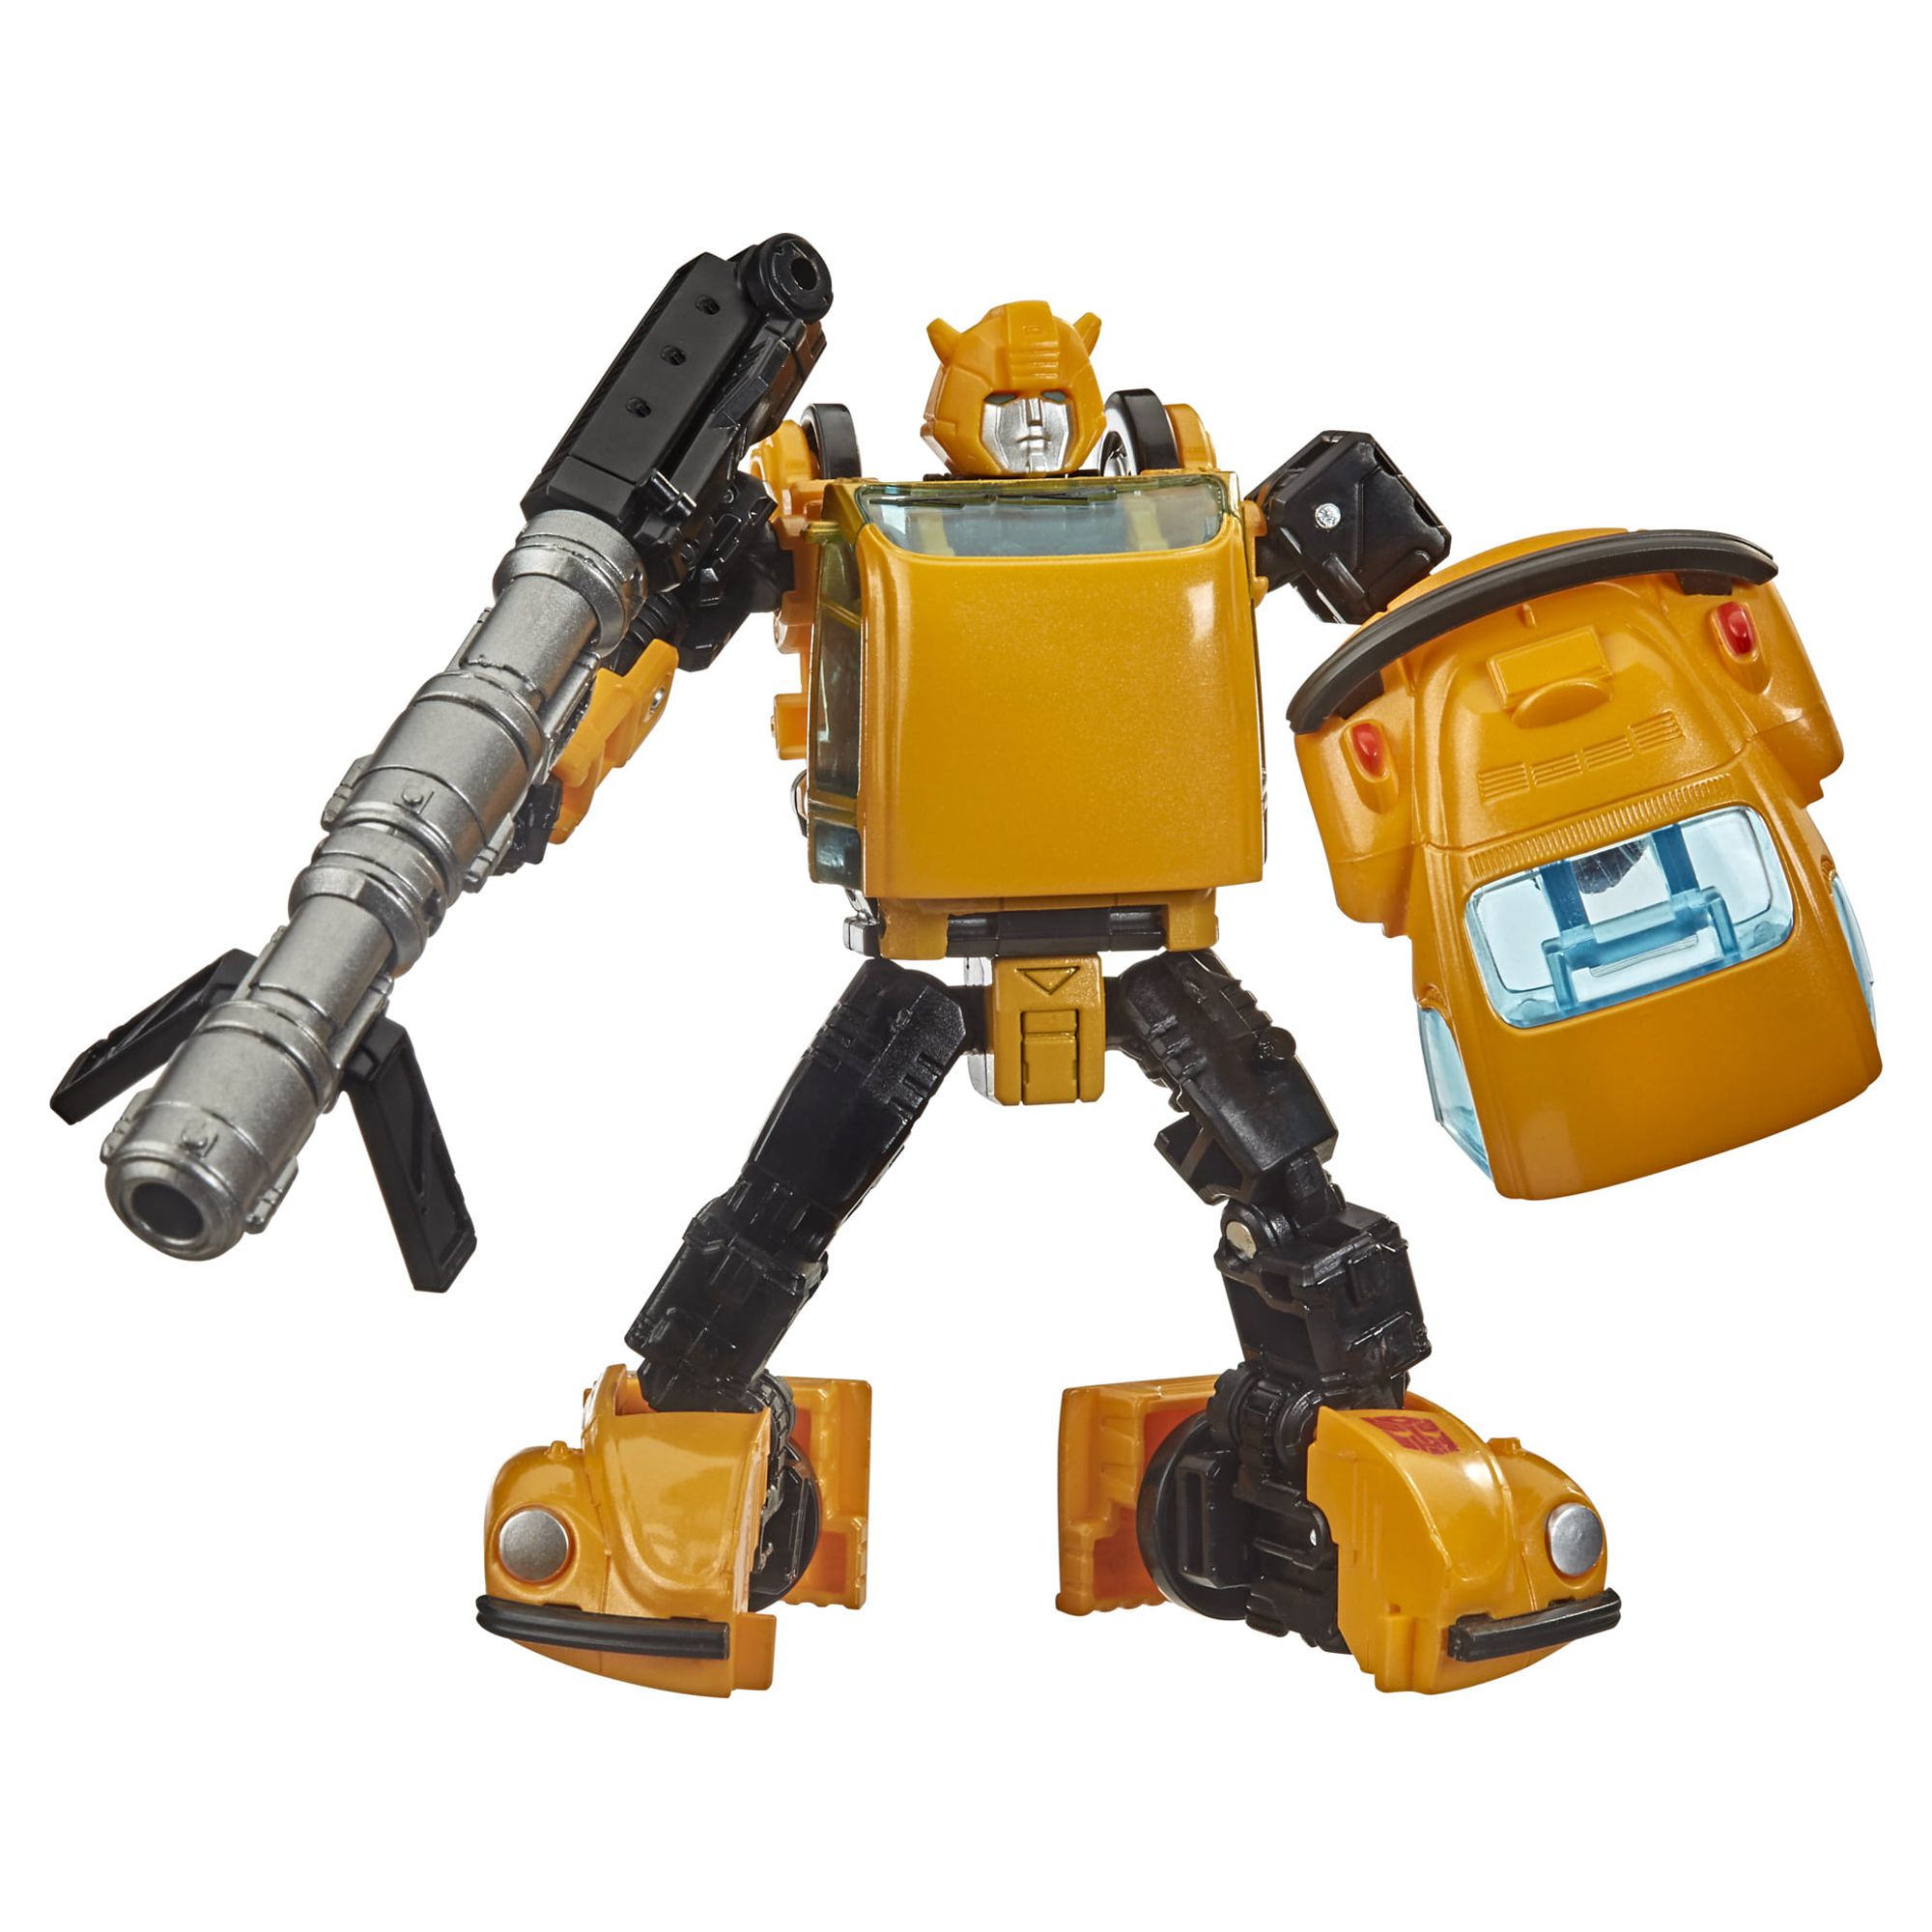 Transformers Generations War for Cybertron Trilogy Series-Inspired Deluxe Bumblebee Figure - image 2 of 5